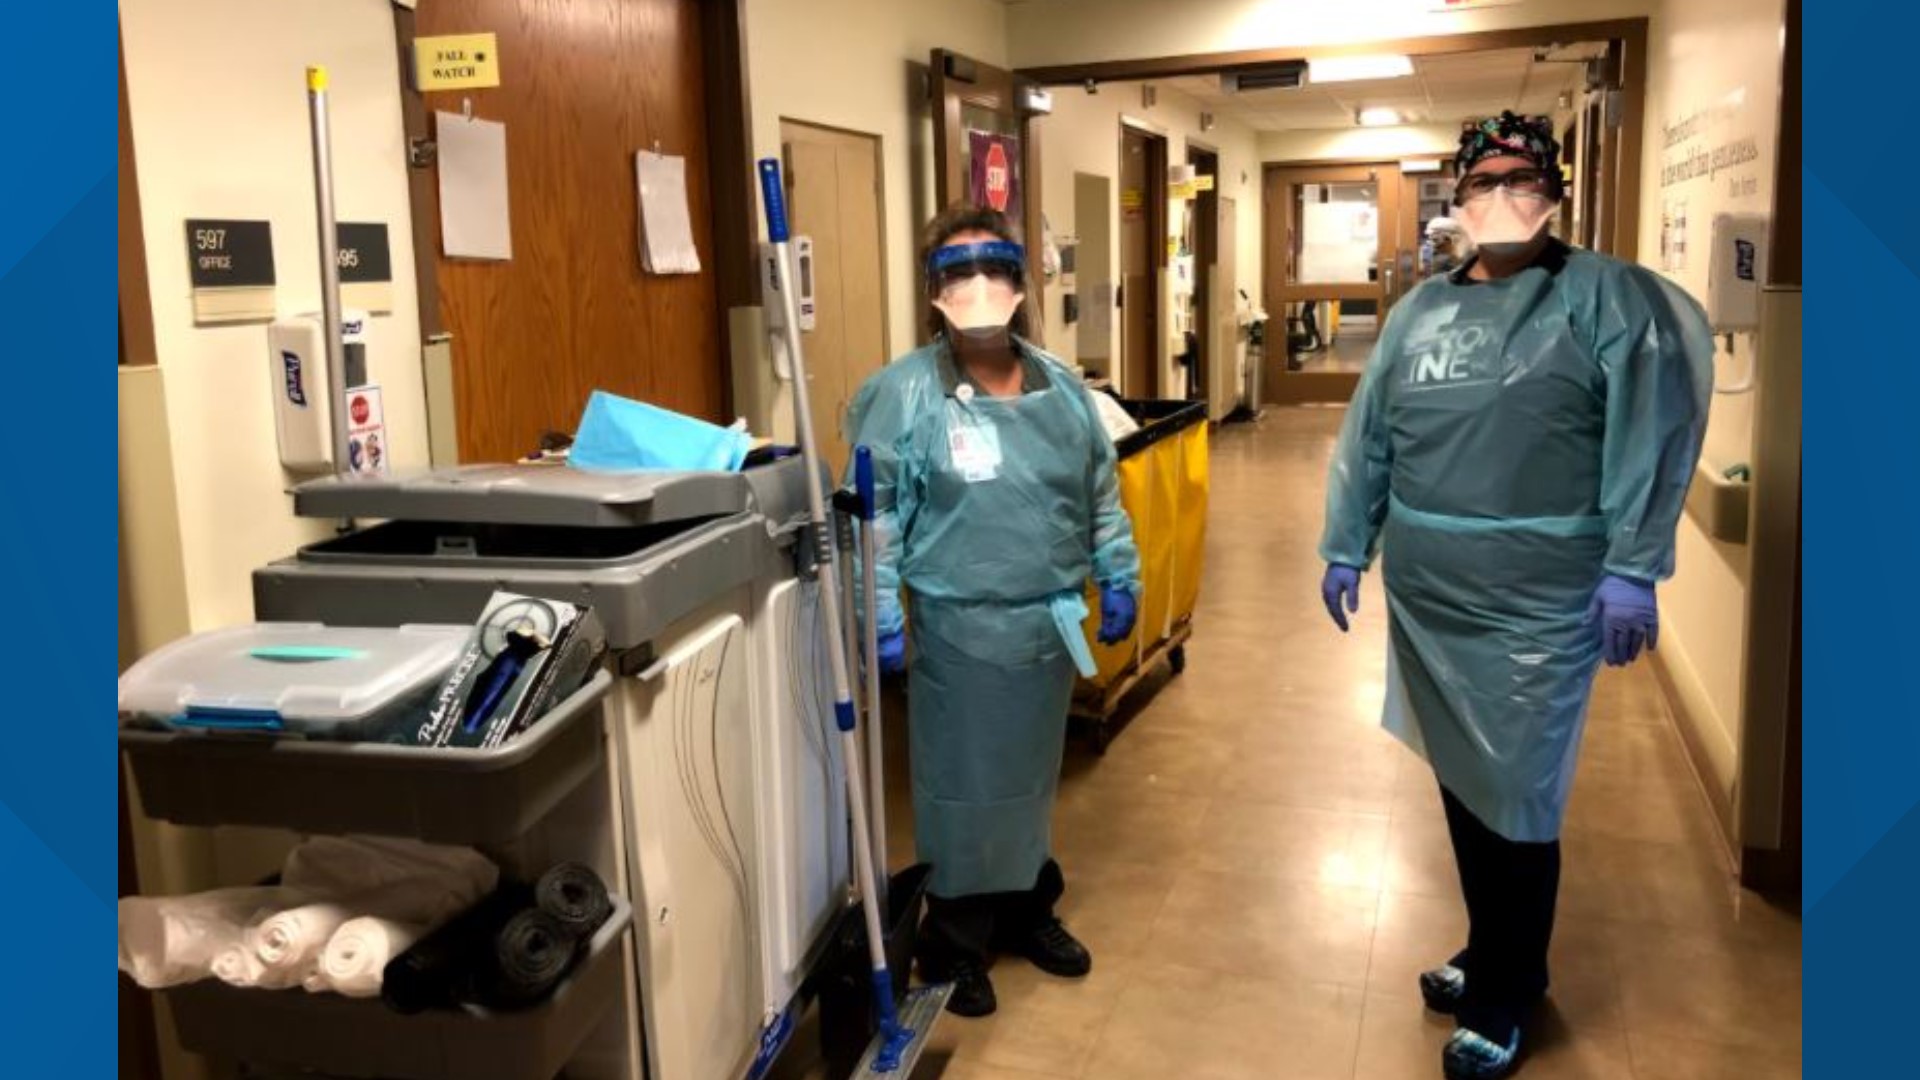 We are honoring and giving a shout out to our area's housekeepers in this Reasons To Smile segment. Some are calling them the "hidden heroes" of the pandemic.